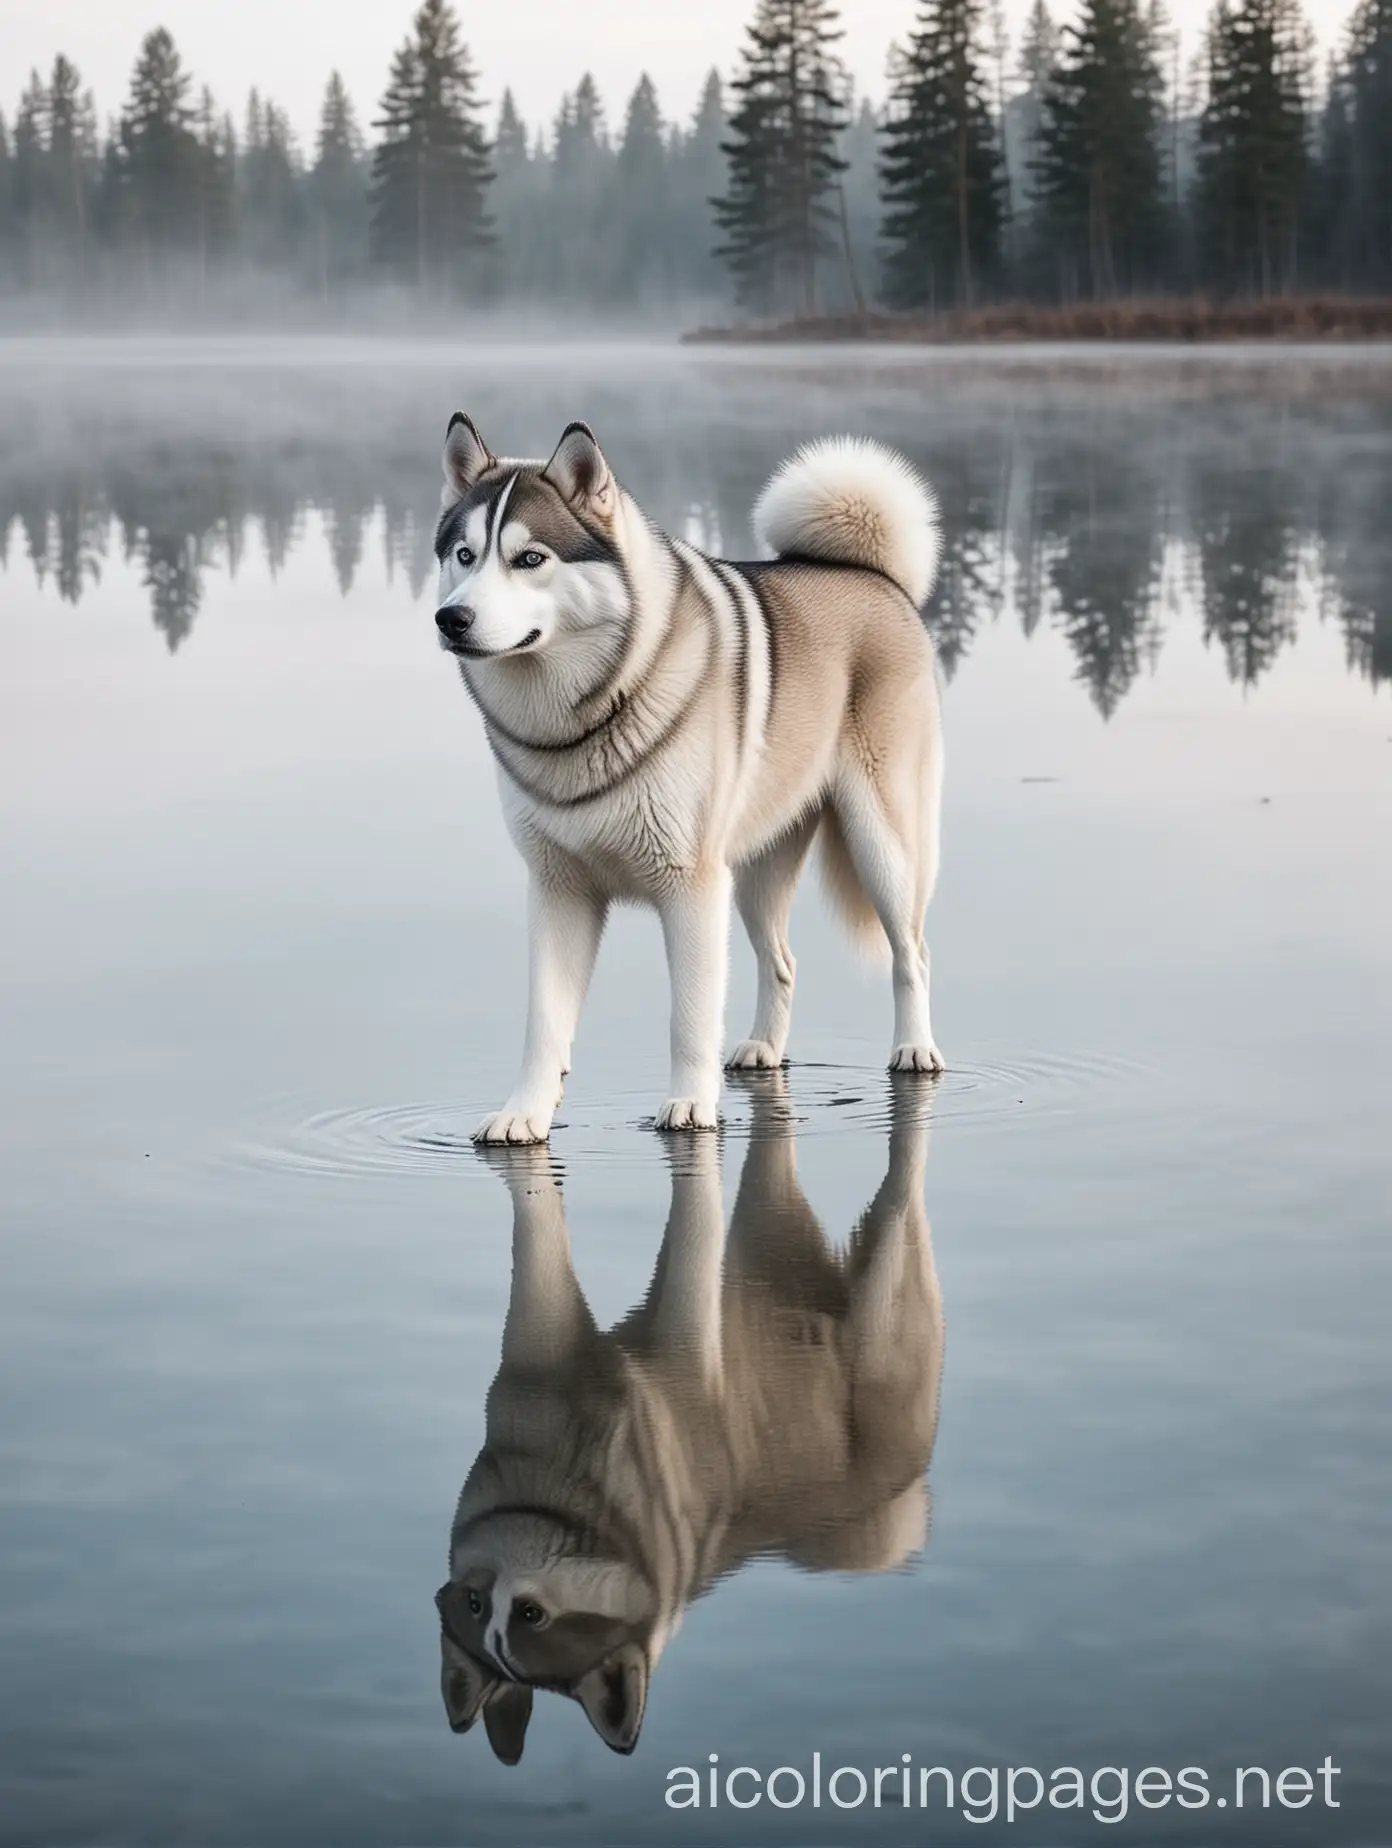 A Siberian Husky walks on the smooth surface of a shallow lake, creating a mirror-like reflection of itself. The background features a serene, misty treeline and calm blue sky., Coloring Page, black and white, line art, white background, Simplicity, Ample White Space, Coloring Page, black and white, line art, white background, Simplicity, Ample White Space. The background of the coloring page is plain white to make it easy for young children to color within the lines. The outlines of all the subjects are easy to distinguish, making it simple for kids to color without too much difficulty